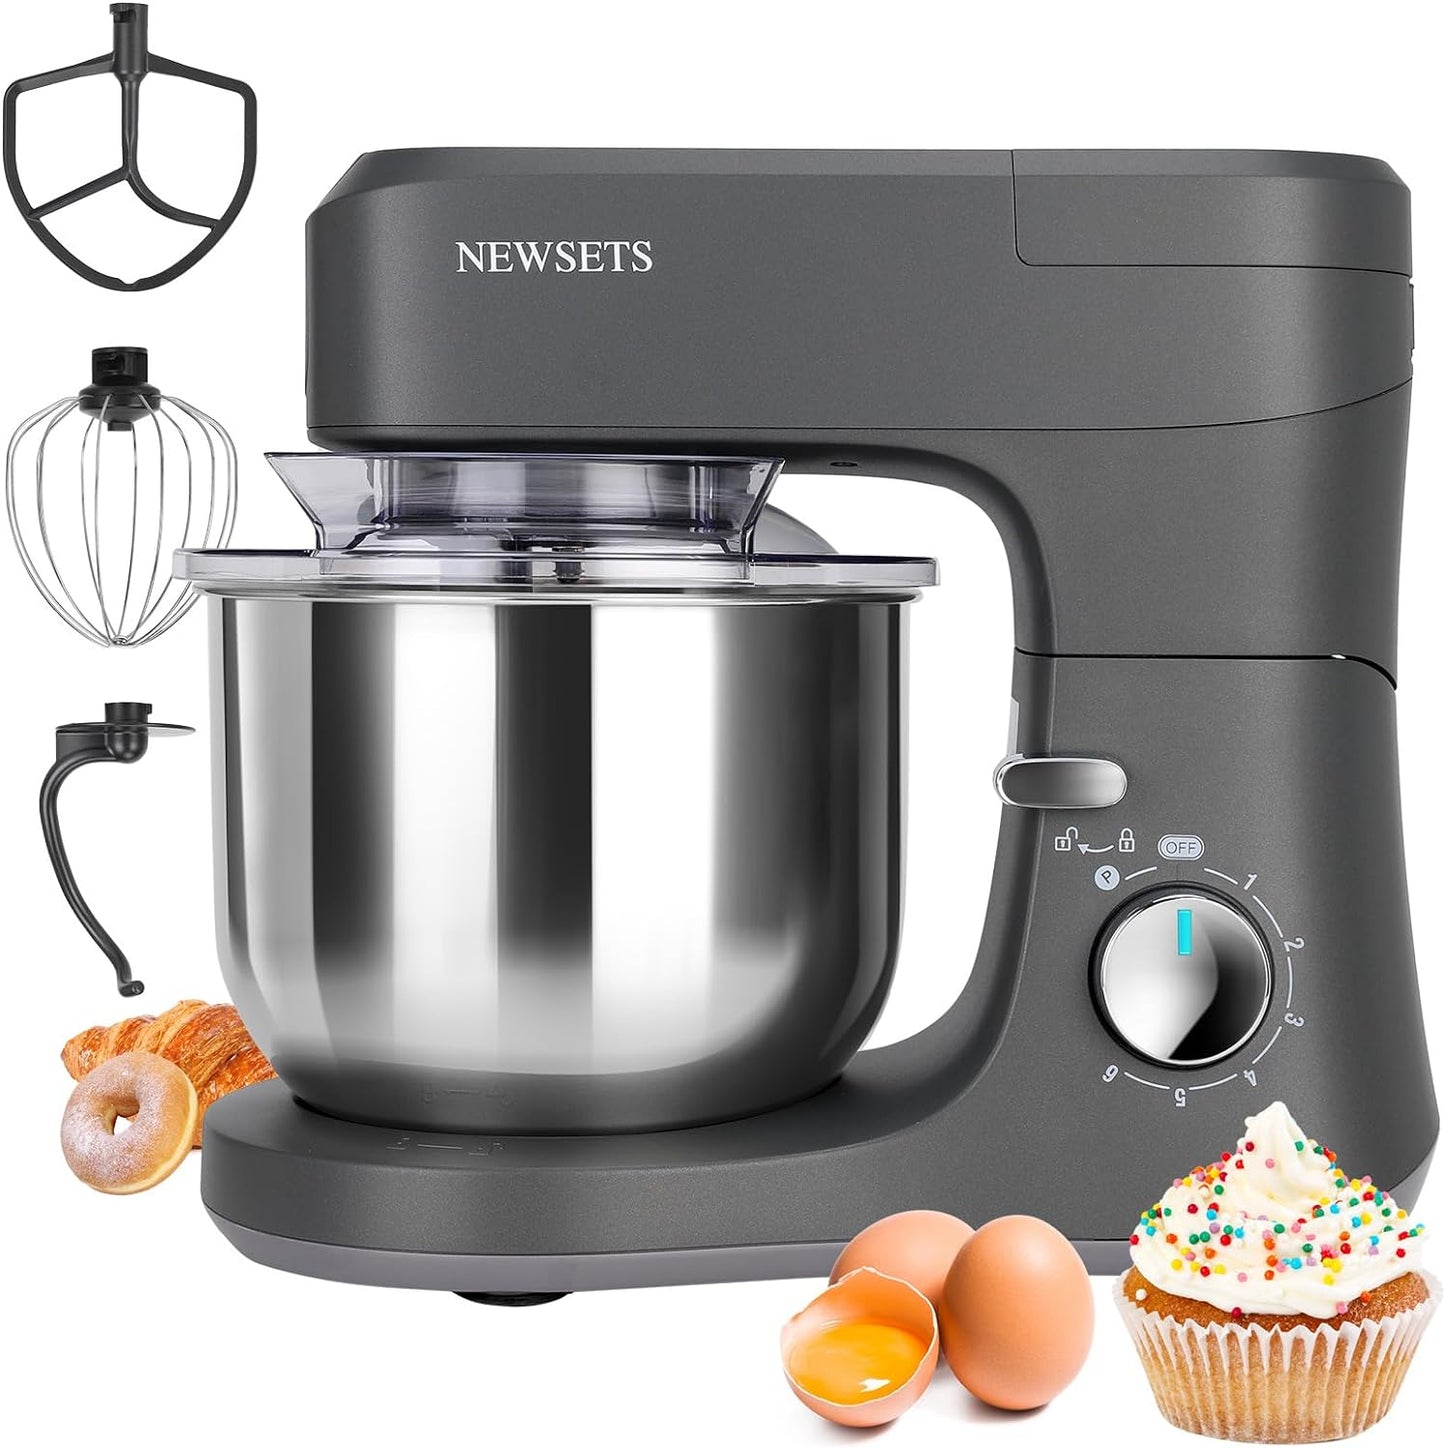 NEWSETS 7.4 QT Stand Mixer,6-Speed Tilt-Head Food Mixer,600W Electric Kitchen Mixer with Dough Hook, Whisk, Beater, Splash Guard & Mixing Bowl, Planetary Mixing Food Mixer for Baking, Cakes, Cookie